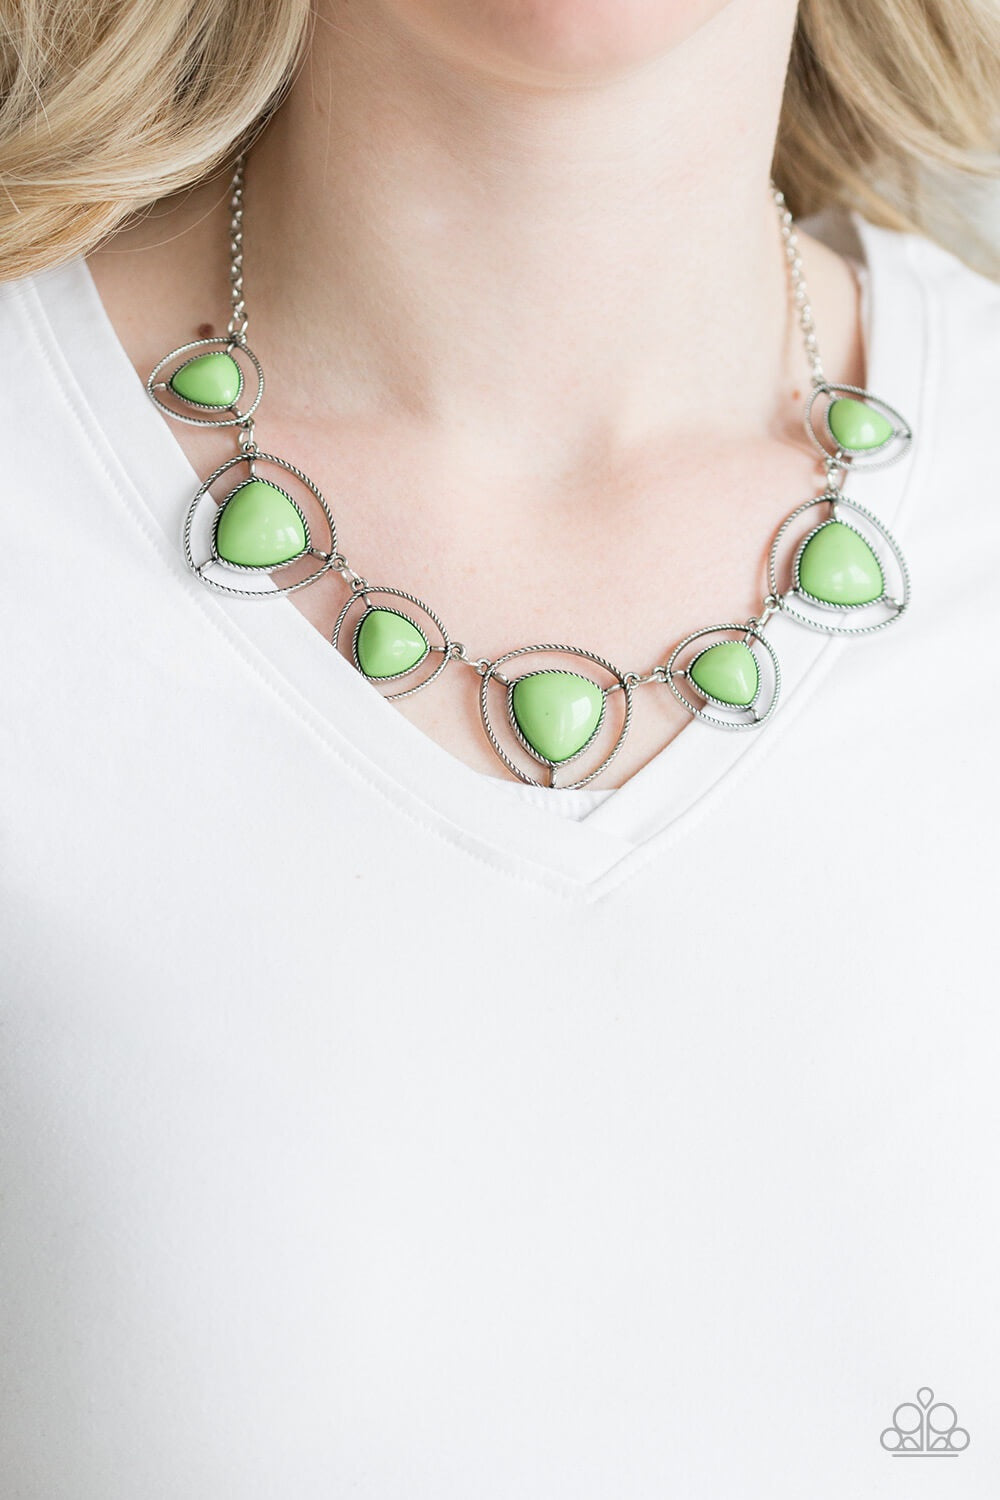 Paparazzi “Make a Point” Green Bead Triangular Necklace